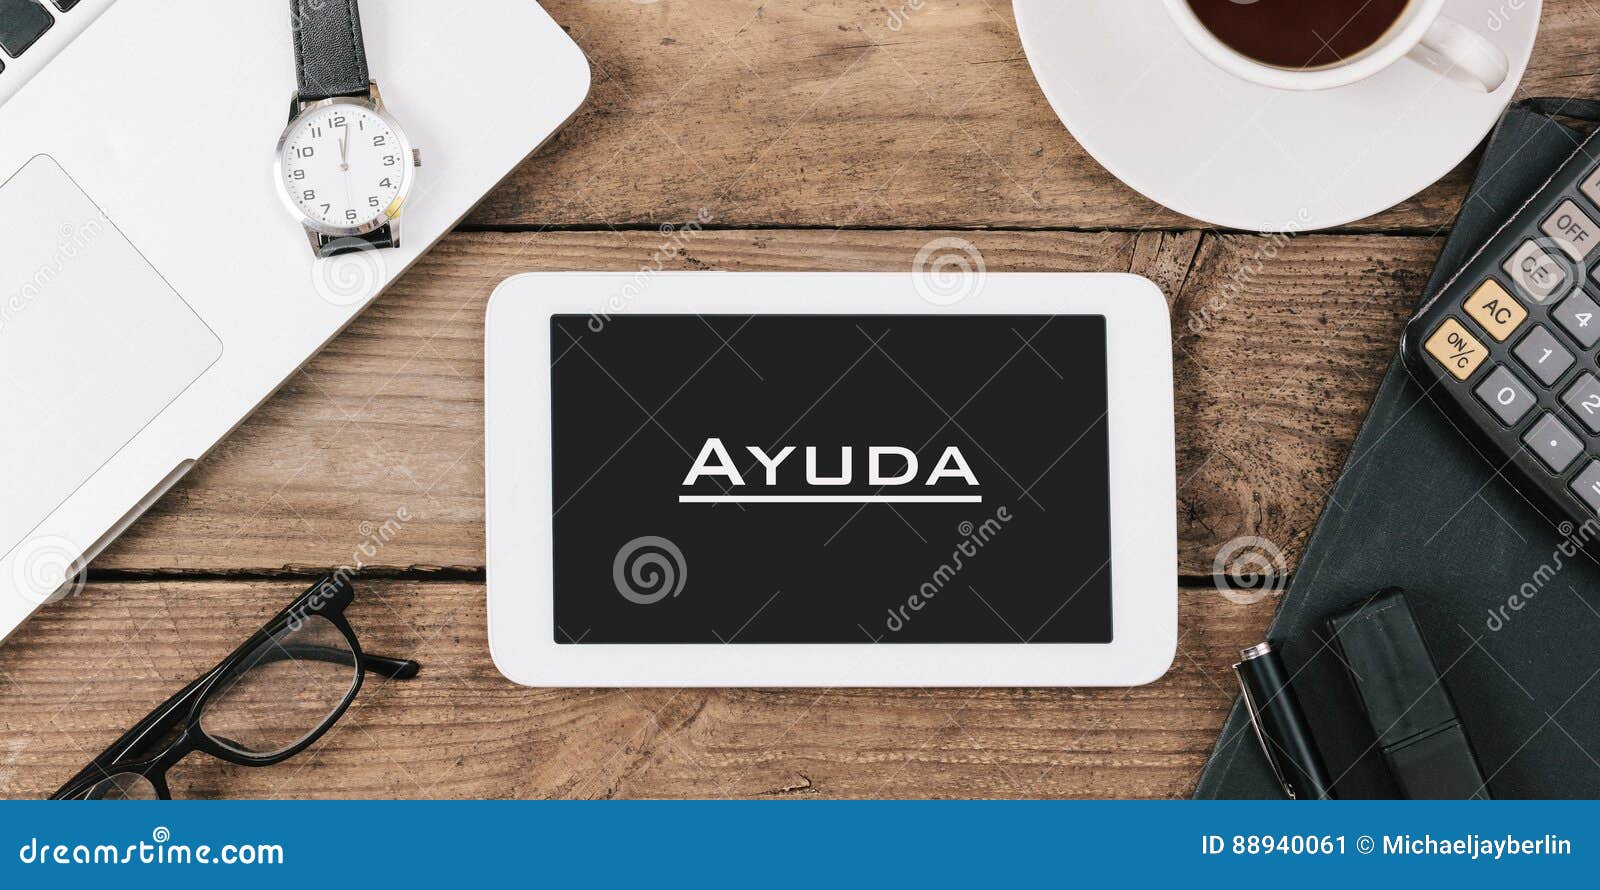 ayuda, spanish text for help on screen of tablet computer at off